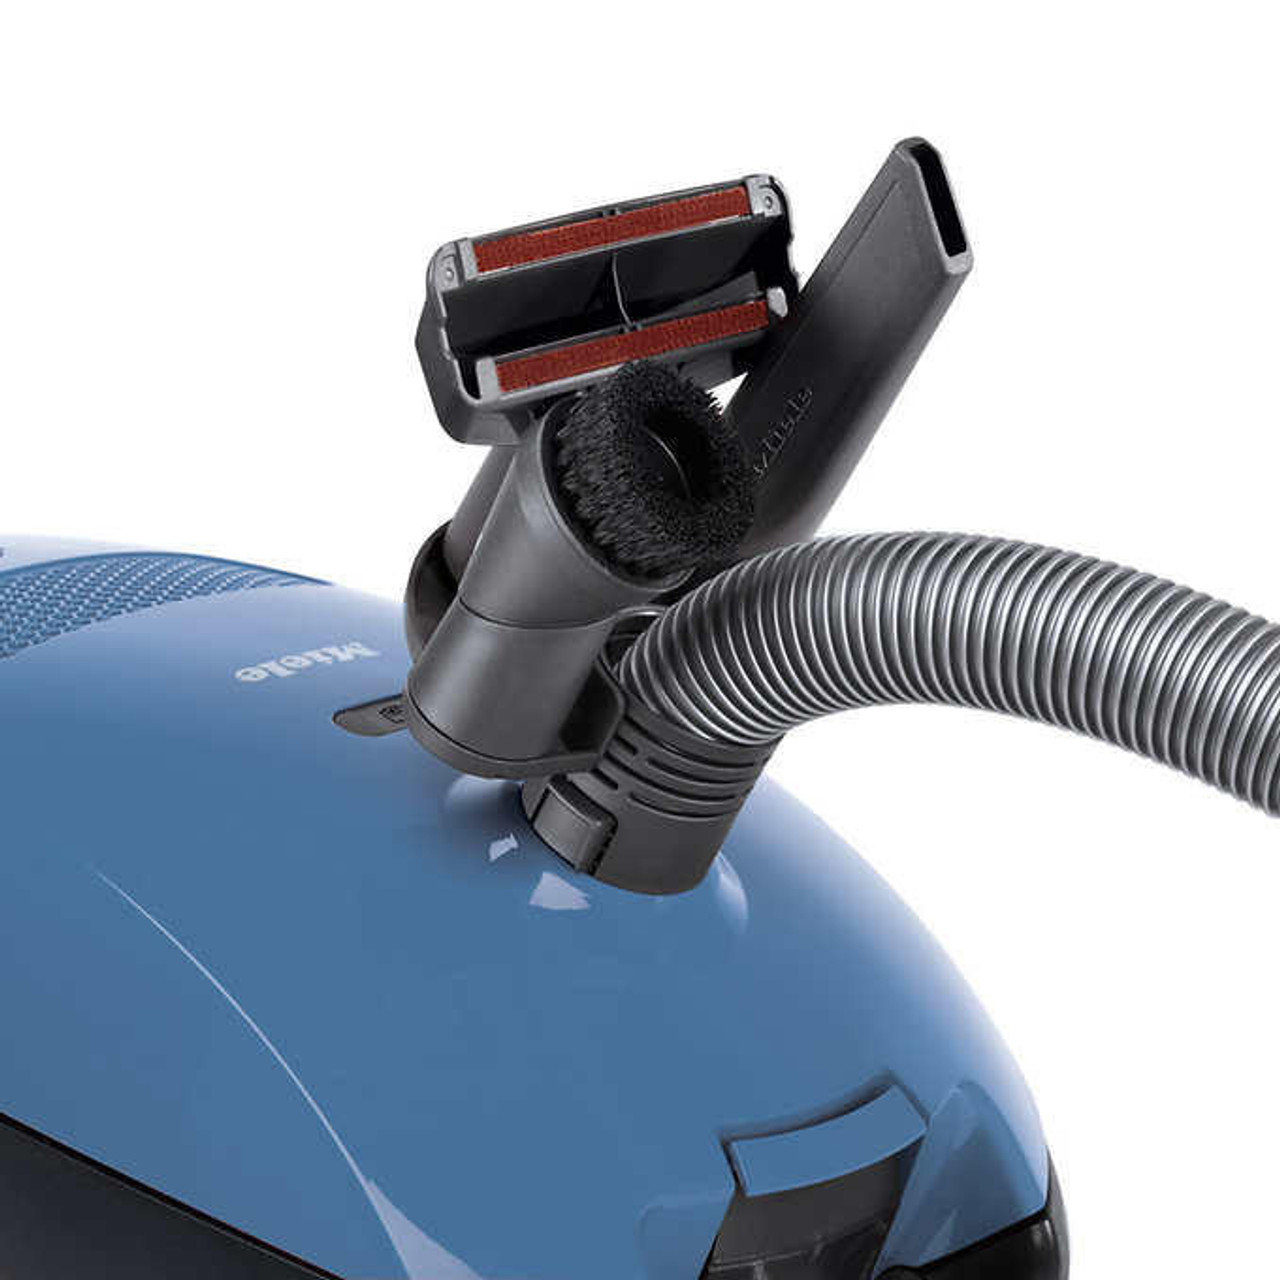 Miele Classic C1 Hardfloor Canister Vacuum - Master the Art of Hardfloor Cleaning- Chicken Pieces